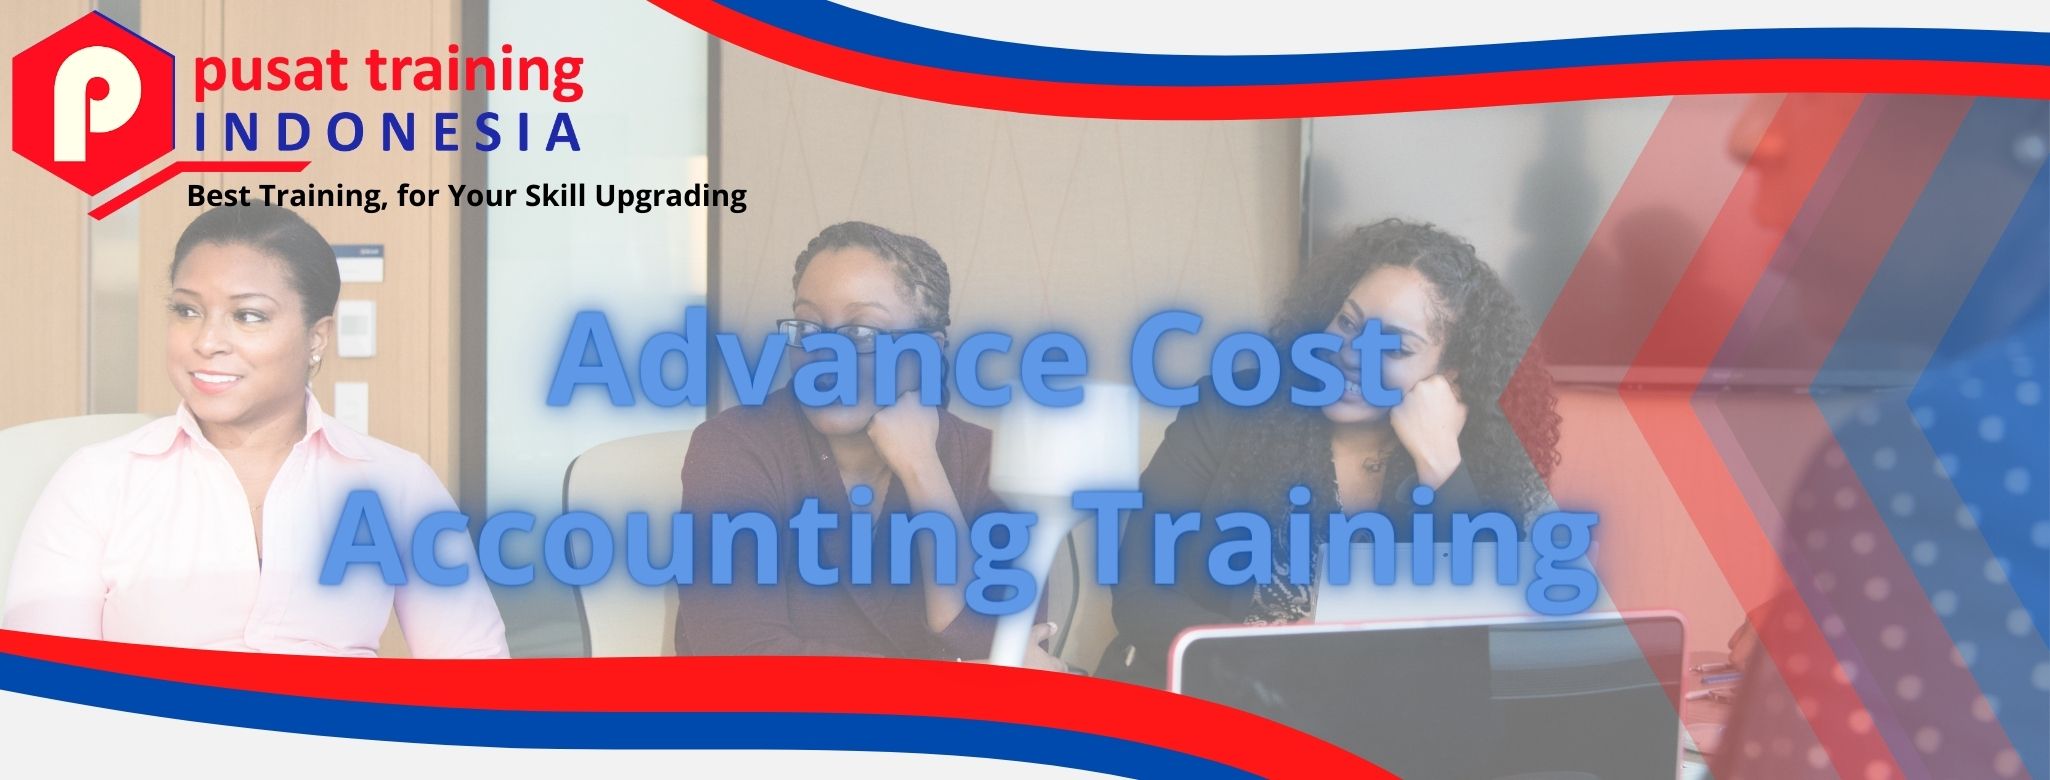 Advance Cost Accounting Training 